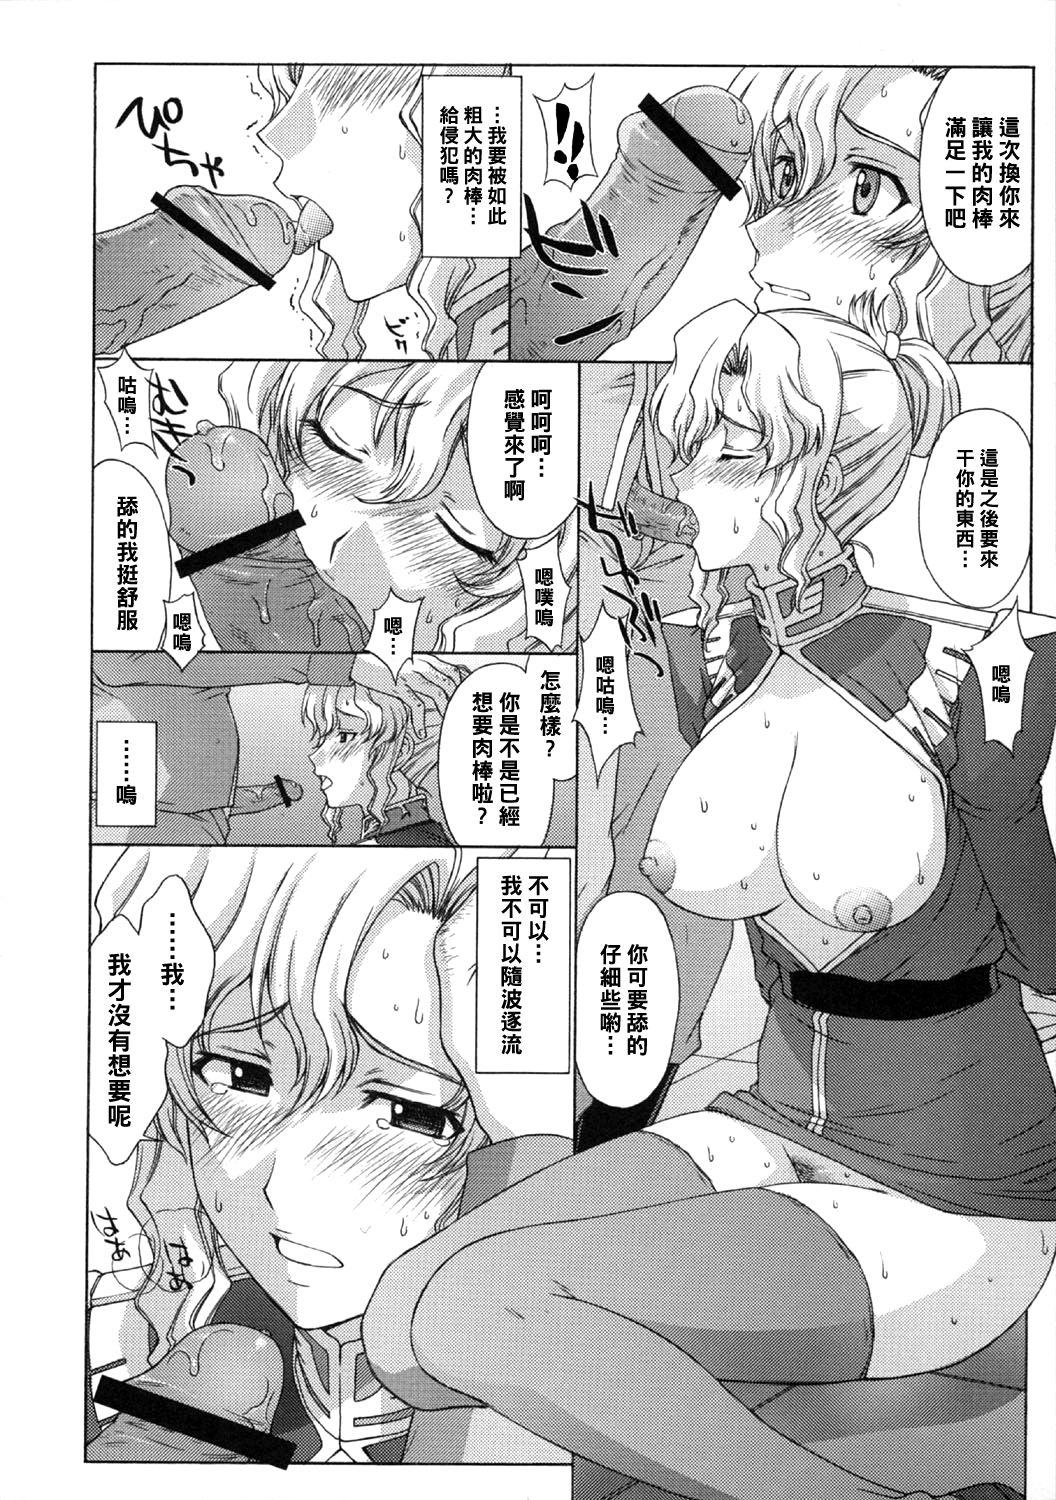 Leche ZEON Lost War Chronicles Hishokan Hen - Mobile suit gundam lost war chronicles Cum Eating - Page 5